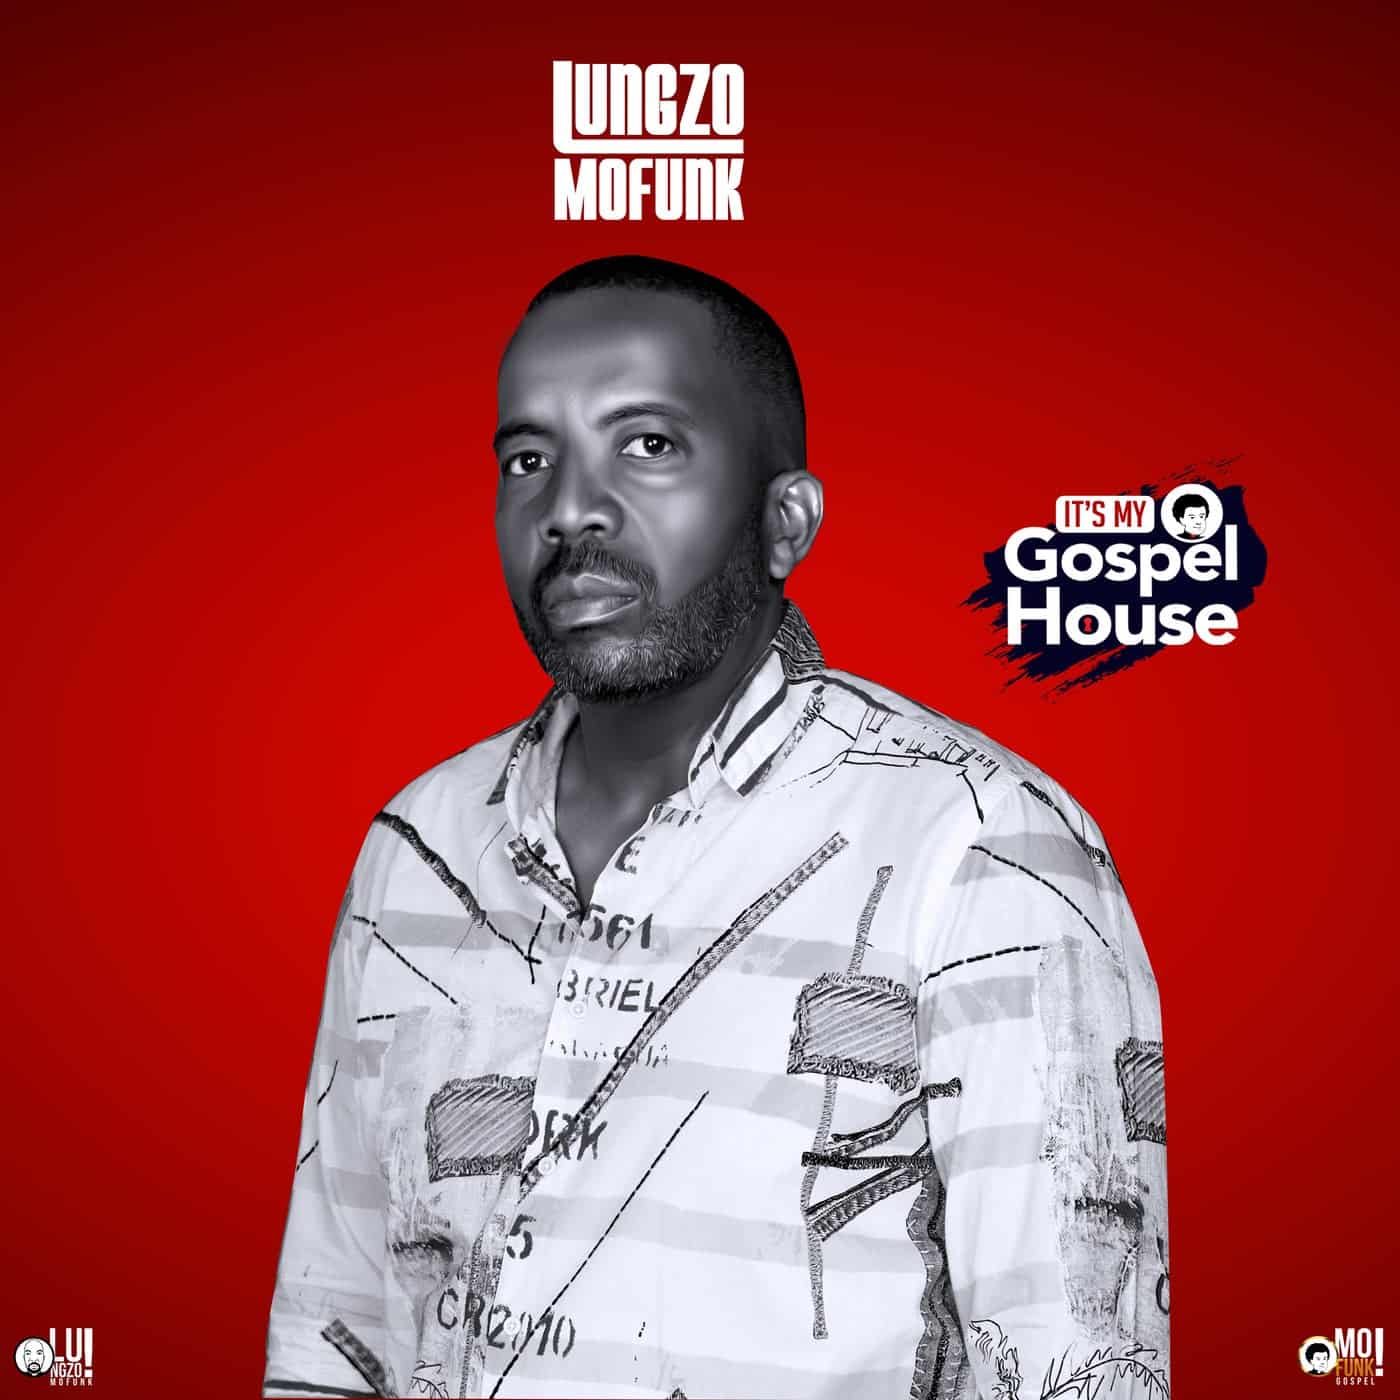 Download Lungzo Mofunk - It's My Gospel House on Electrobuzz